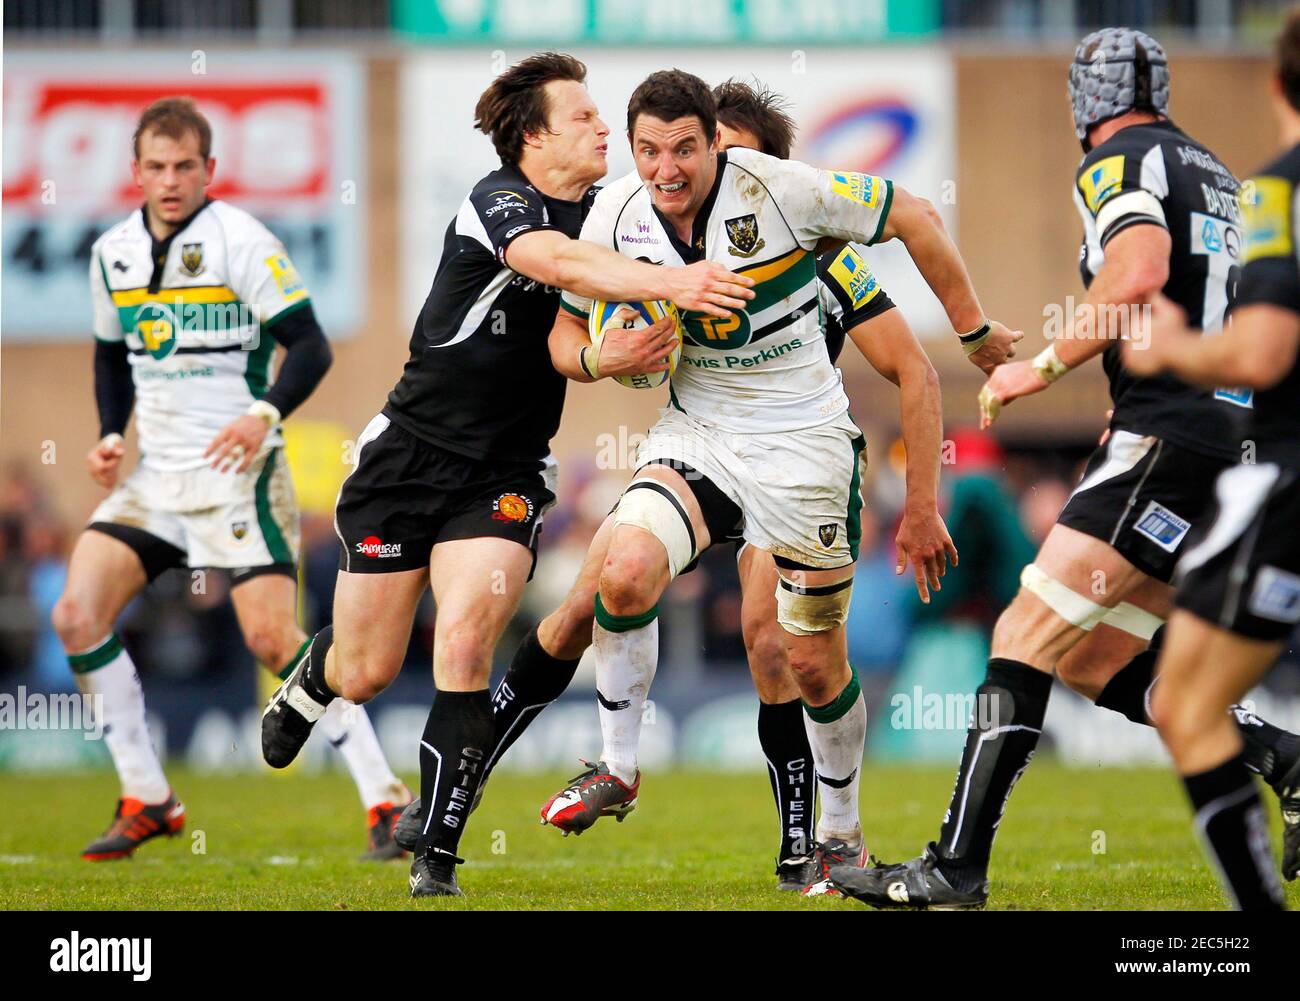 Rugby Union - Exeter Chiefs v Northampton Saints Aviva Premiership  - Sandy Park  - 22/4/12  Northampton Saints' Phil Dowson (C) in action with Exeter Chiefs' Bryan Rennie (L)  Mandatory Credit: Action Images / James Benwell  Livepic Stock Photo